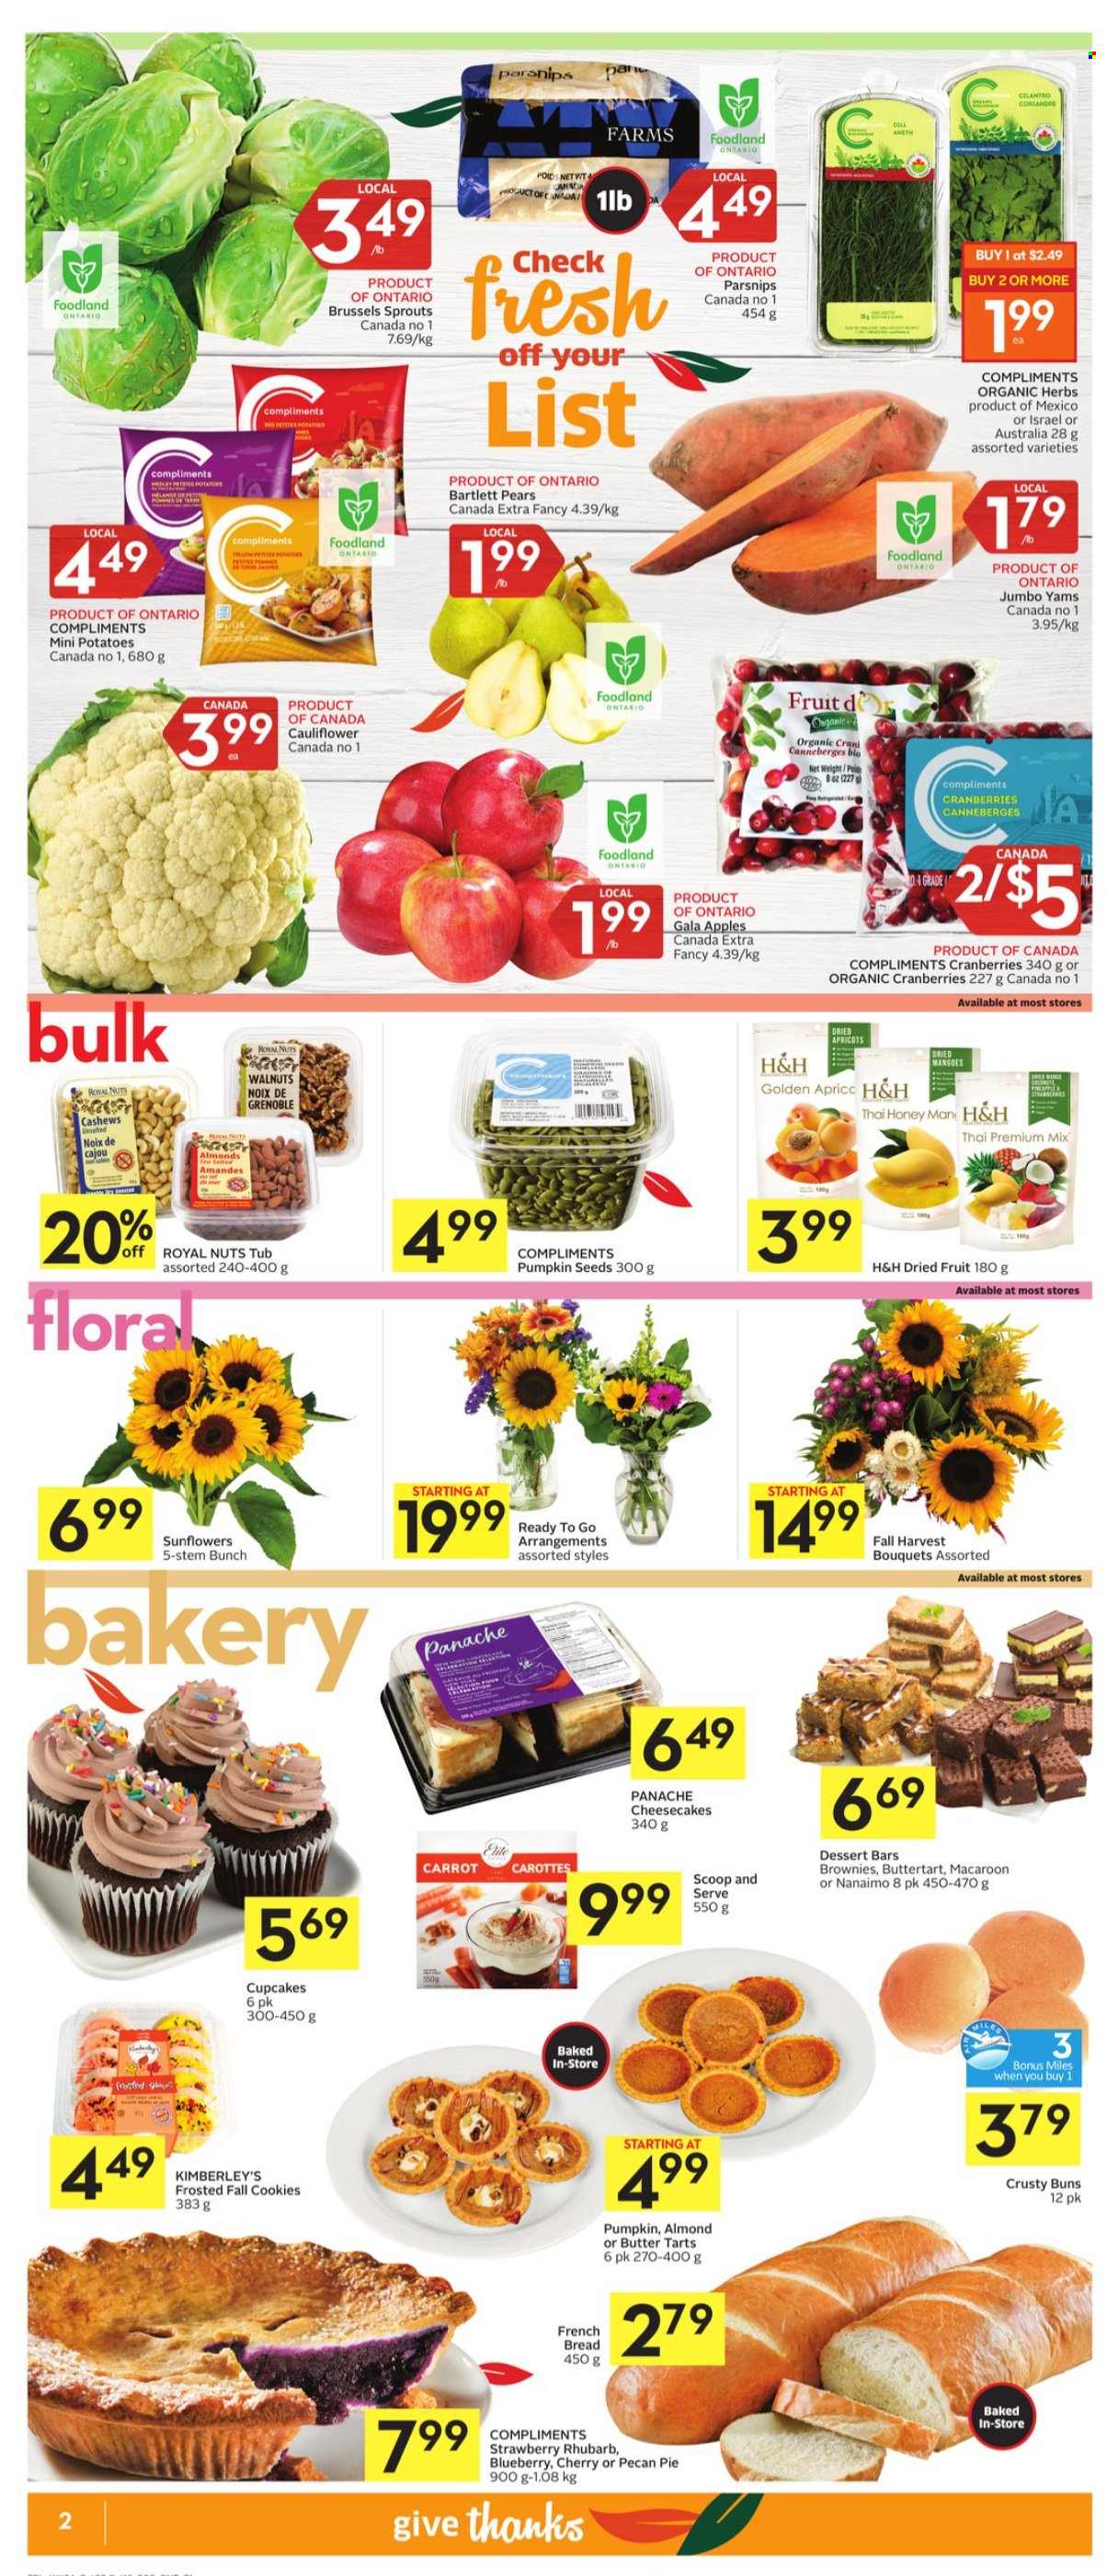 thumbnail - Foodland Flyer - October 07, 2021 - October 13, 2021 - Sales products - bread, pie, tart, buns, french bread, cupcake, cheesecake, brownies, dessert, cauliflower, potatoes, parsnips, brussel sprouts, apples, Bartlett pears, Gala, mango, pears, apricots, cookies, bars, cranberries, dill, herbs, cashews, walnuts, dried fruit, pumpkin seeds, sunflower, bouquet, flowers. Page 2.